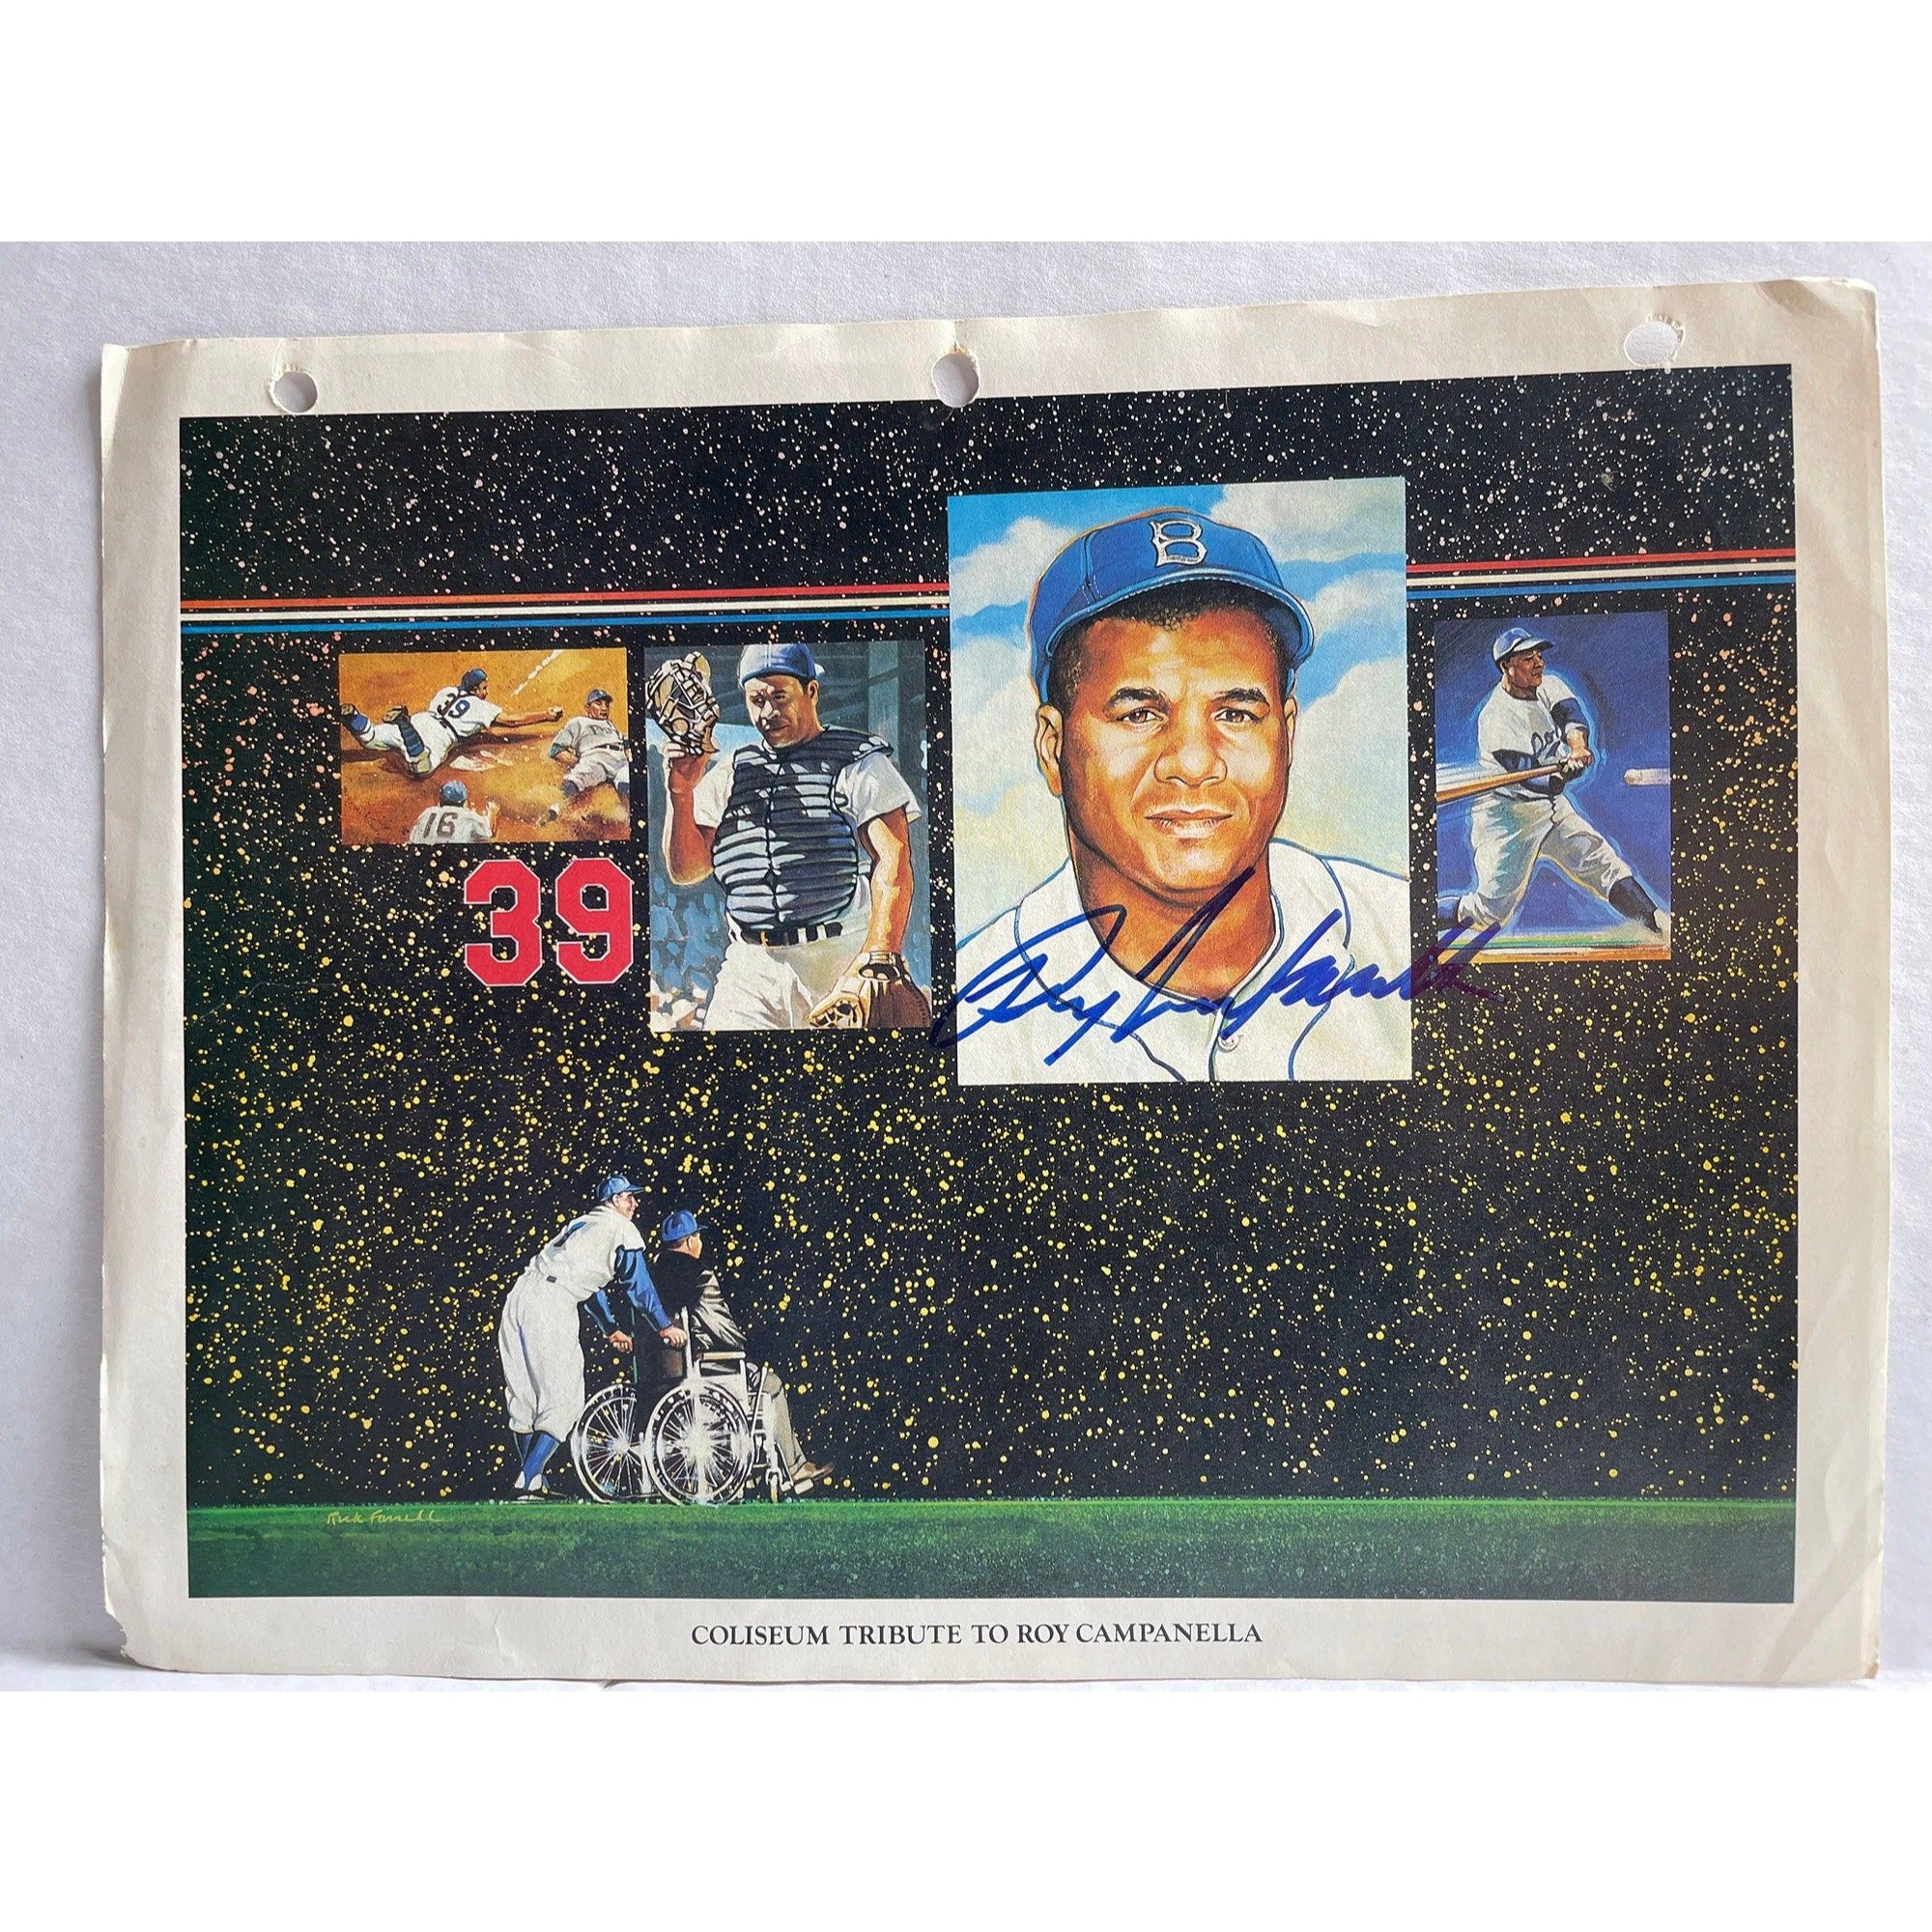 Roy Campanella Brooklyn Dodgers signed Union 76 8.5 by 11 photo signed with proof